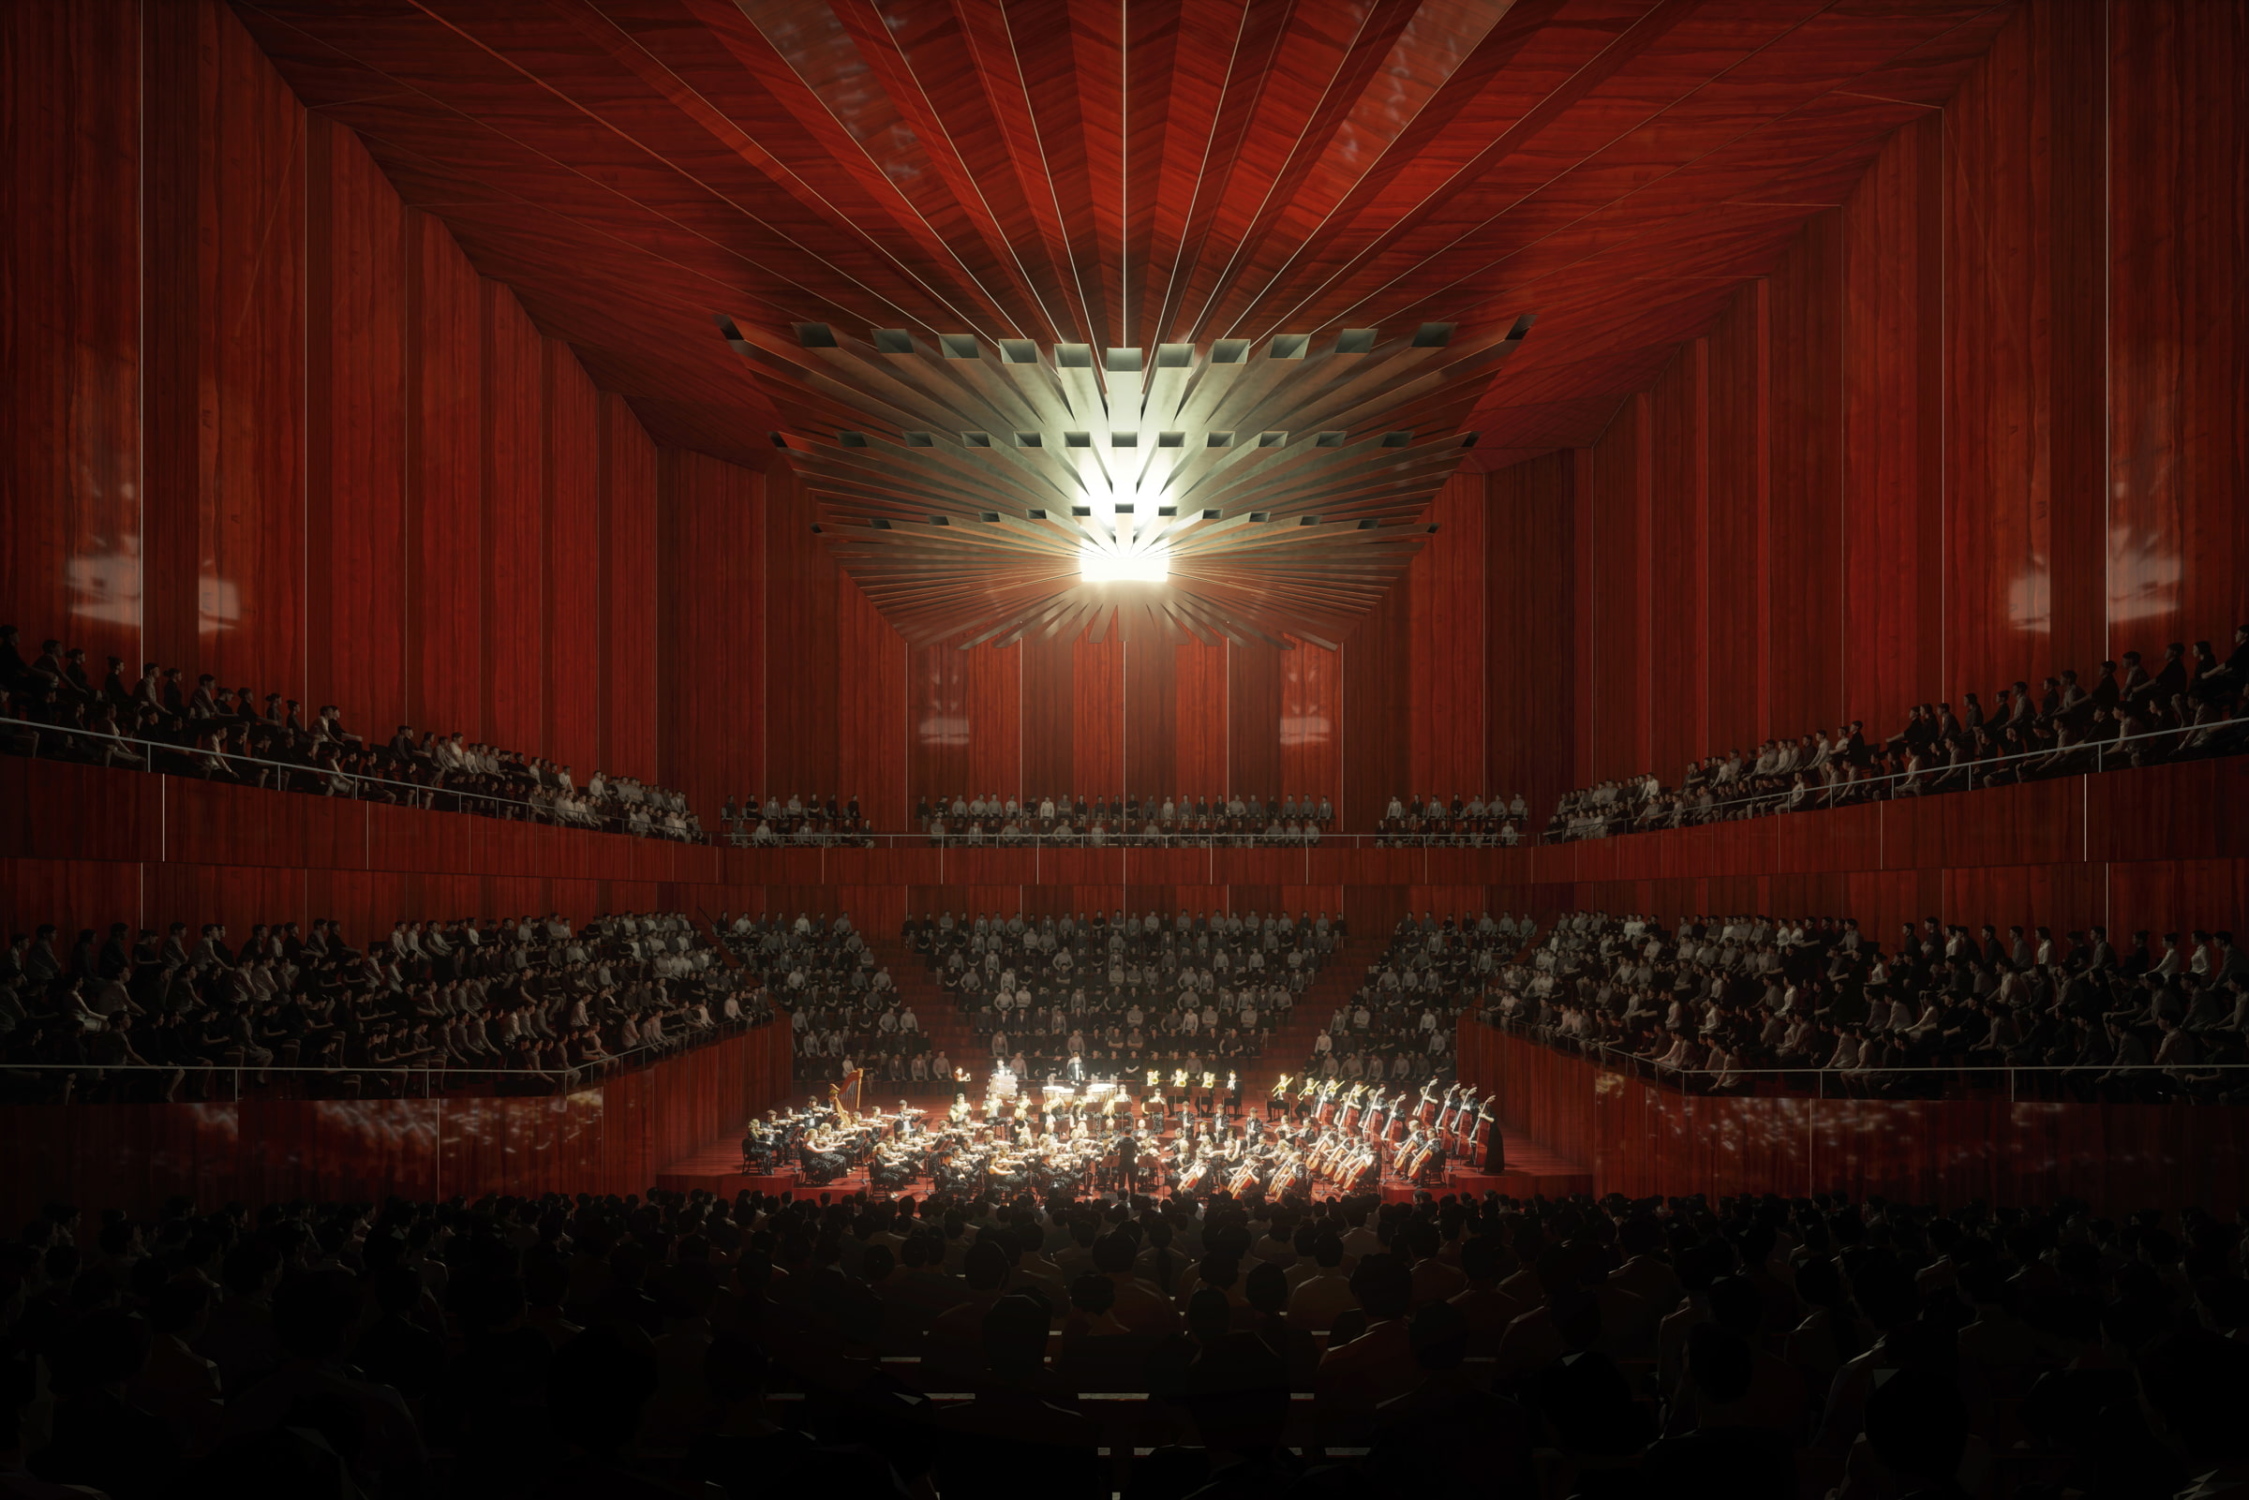 A visualization of the Shenzhen Opera House Concert Hall interior.